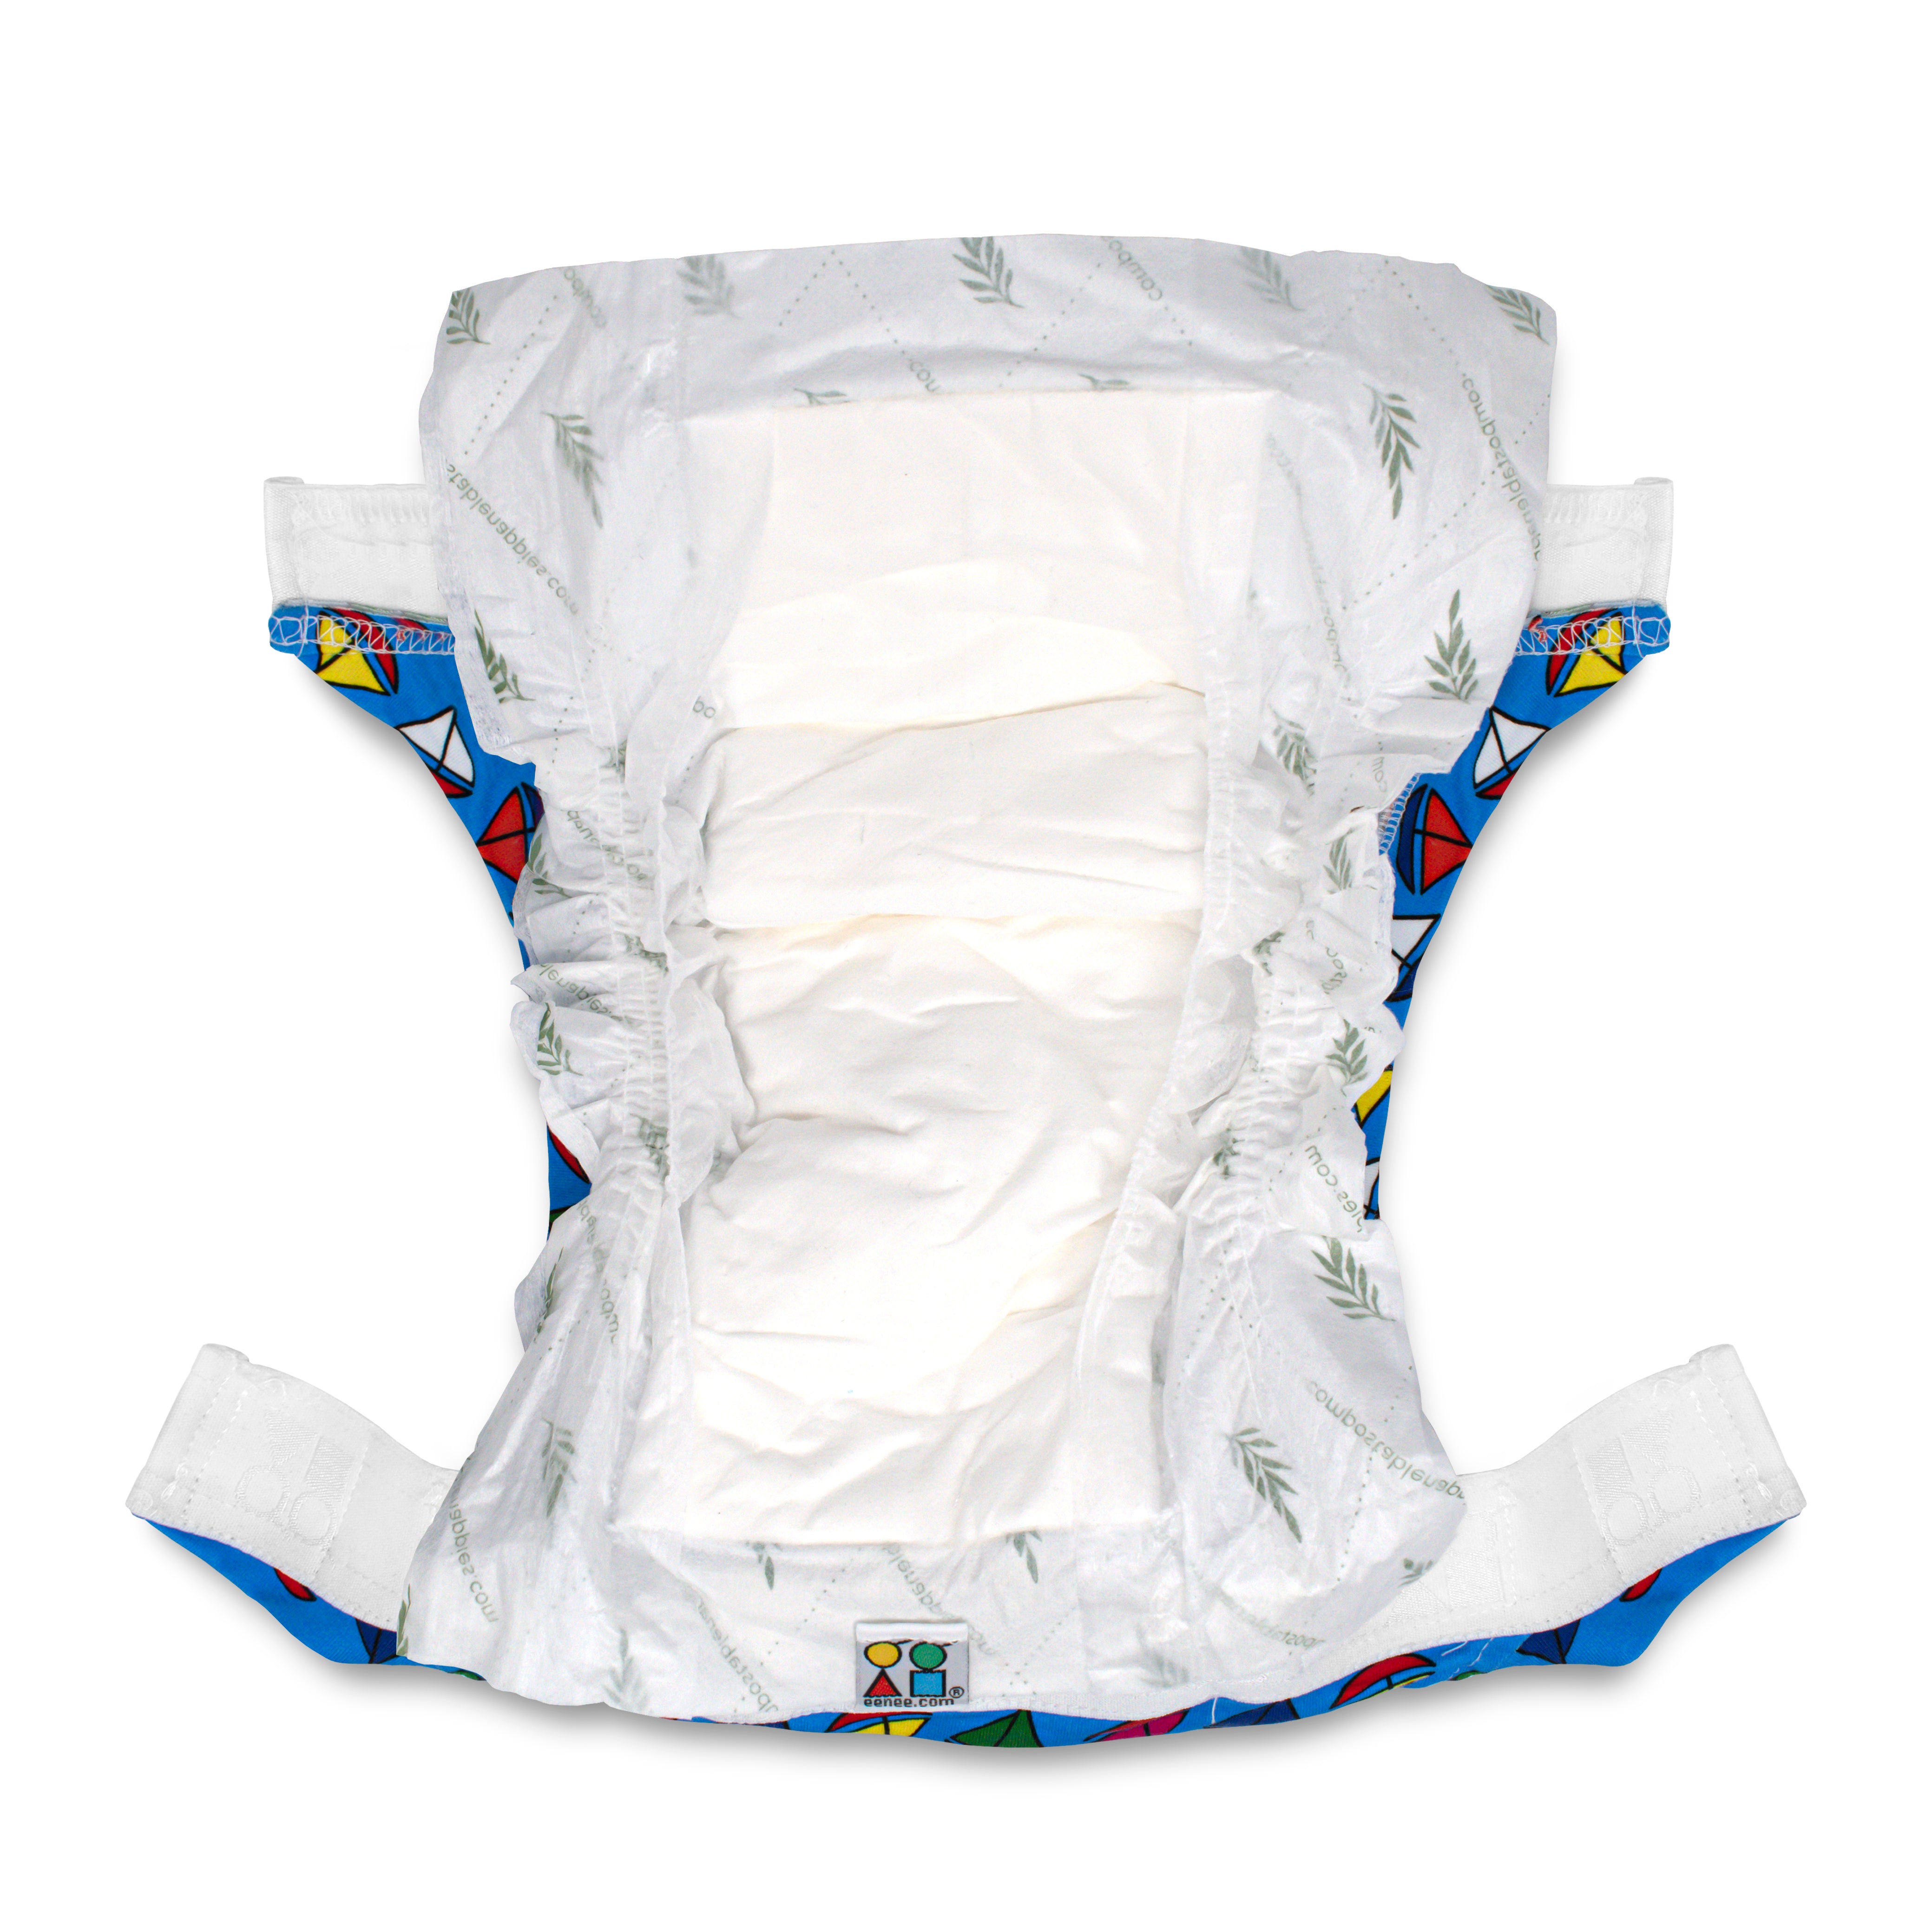 Eenee compostable nappy pad in a hybrid nappy pant